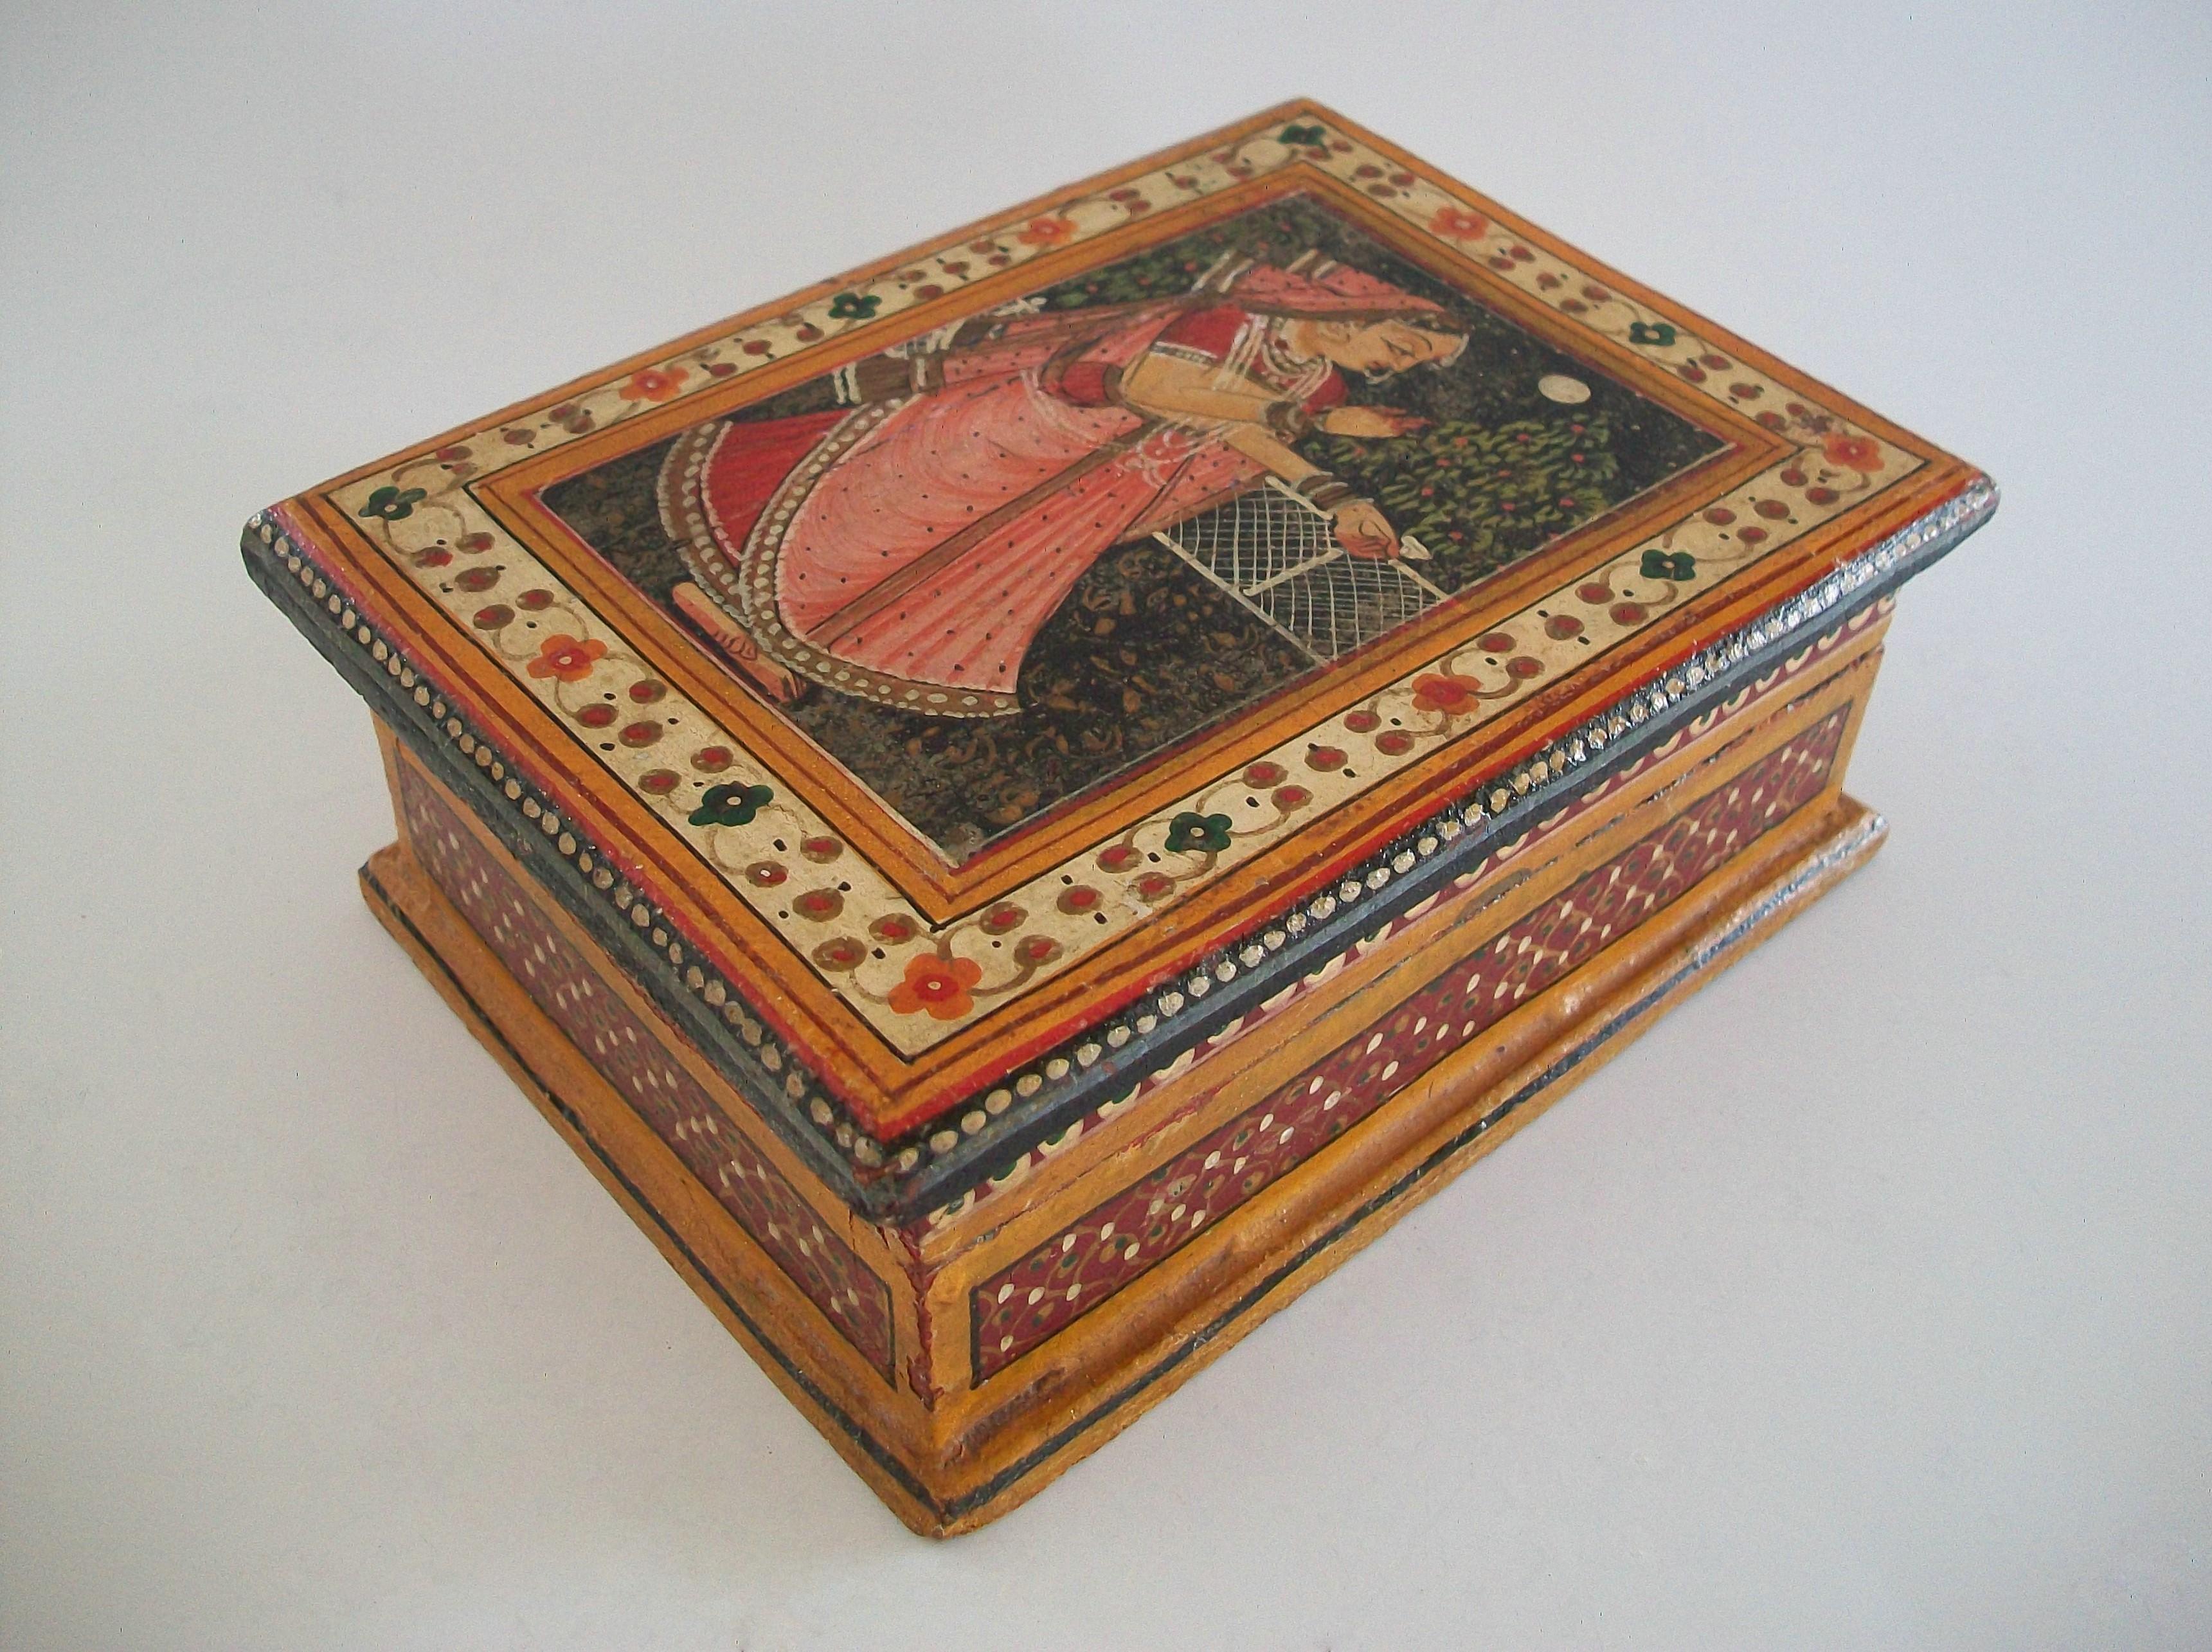 Indian Vintage South Asian Folk Art Hand Painted Wooden Box - India - Mid 20th Century For Sale